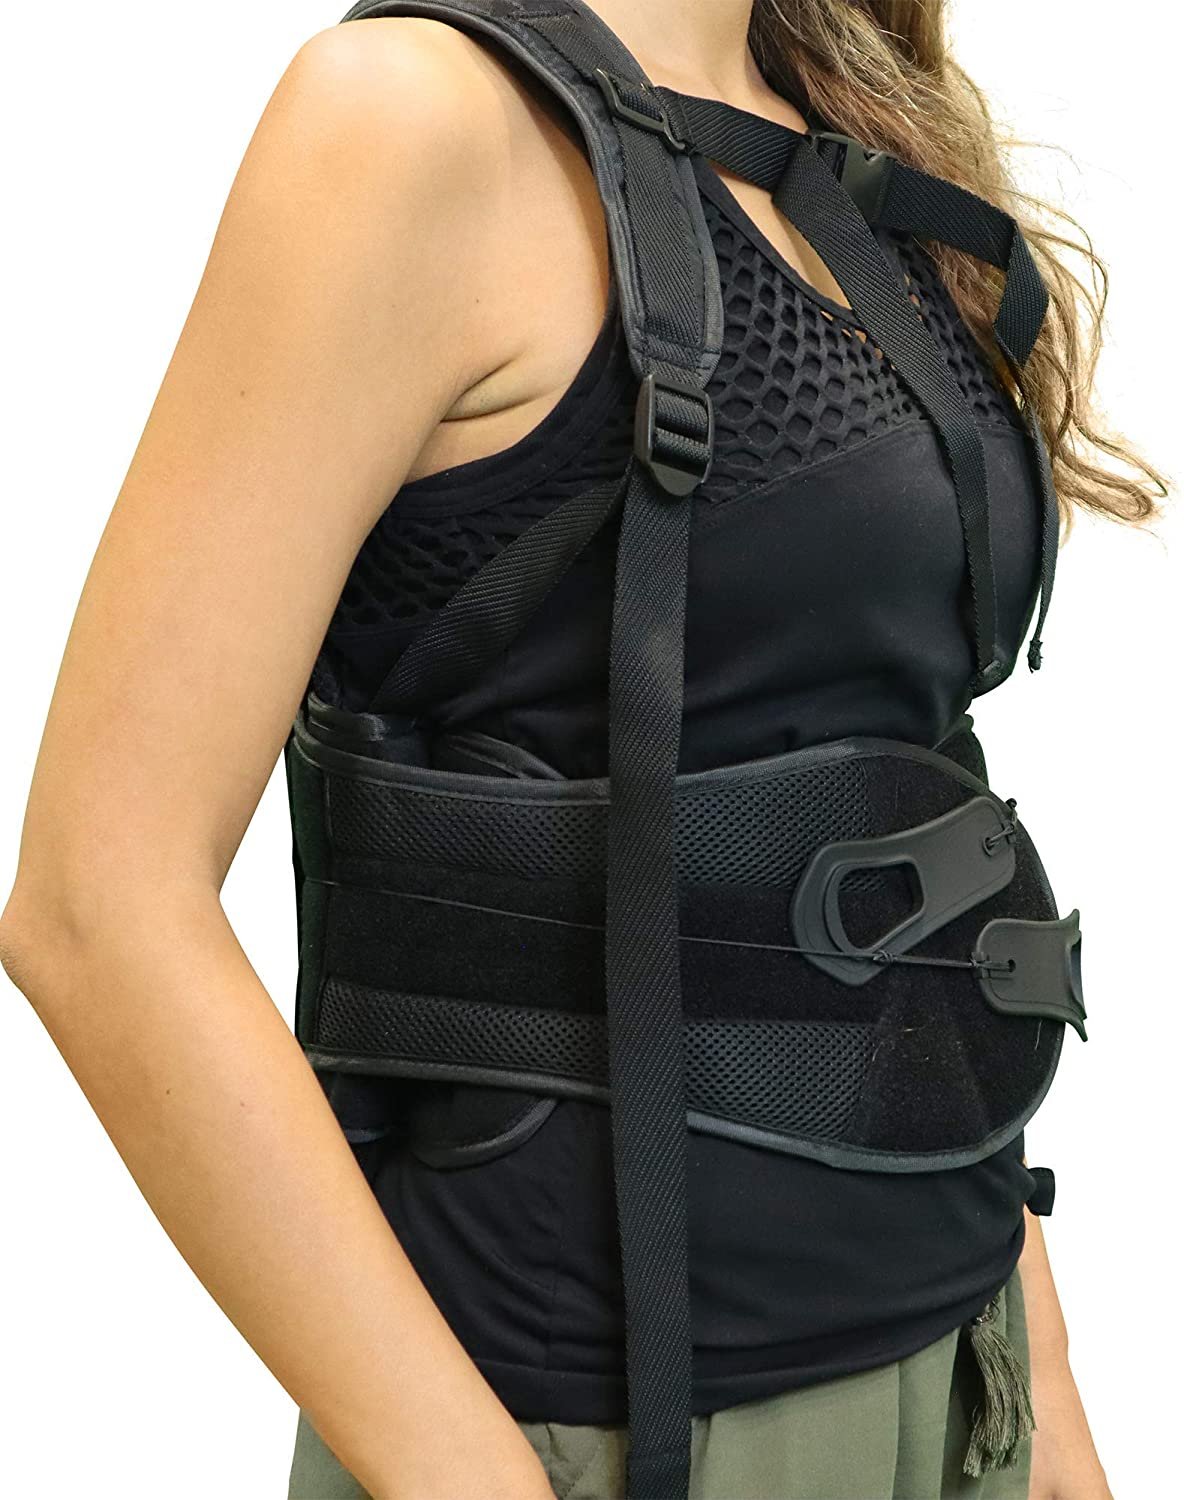 Brace Align TLSO Thoracic Medical Back Brace L0456 L0457 - Back Support and  Back Pain Relief for Fractures Post Op Herniated Disc DDD and Spinal Trauma  Mild Scoliosis Kyphosis Osteoporosis Black Universal